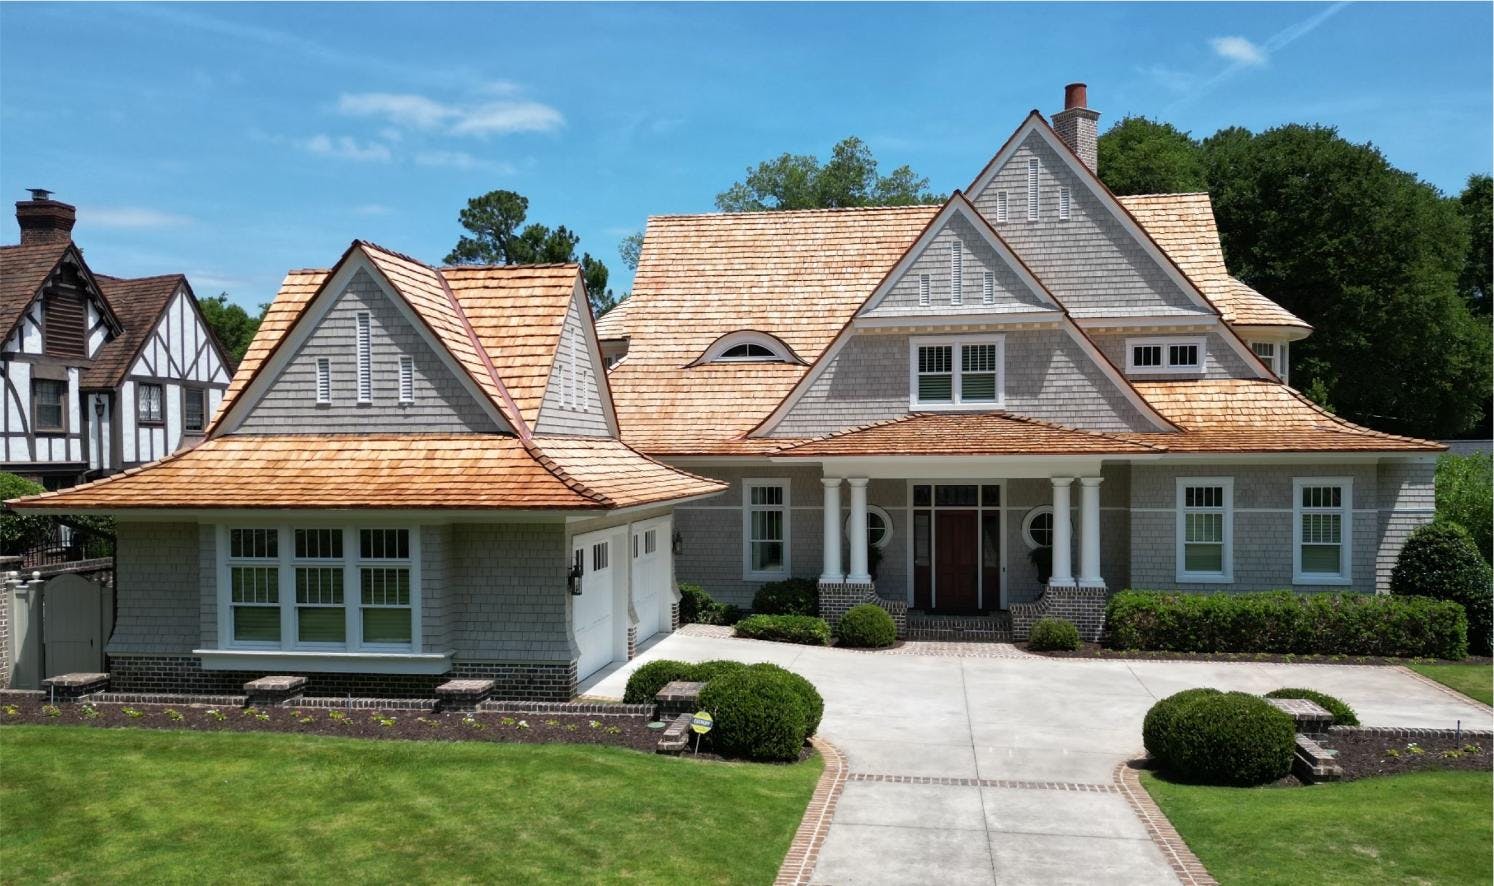 Cedar Shake Roofing | Classic Shake Roof | Coastal Home | Specialty Residential Roofing Solutions | Cedar Shake Shingles